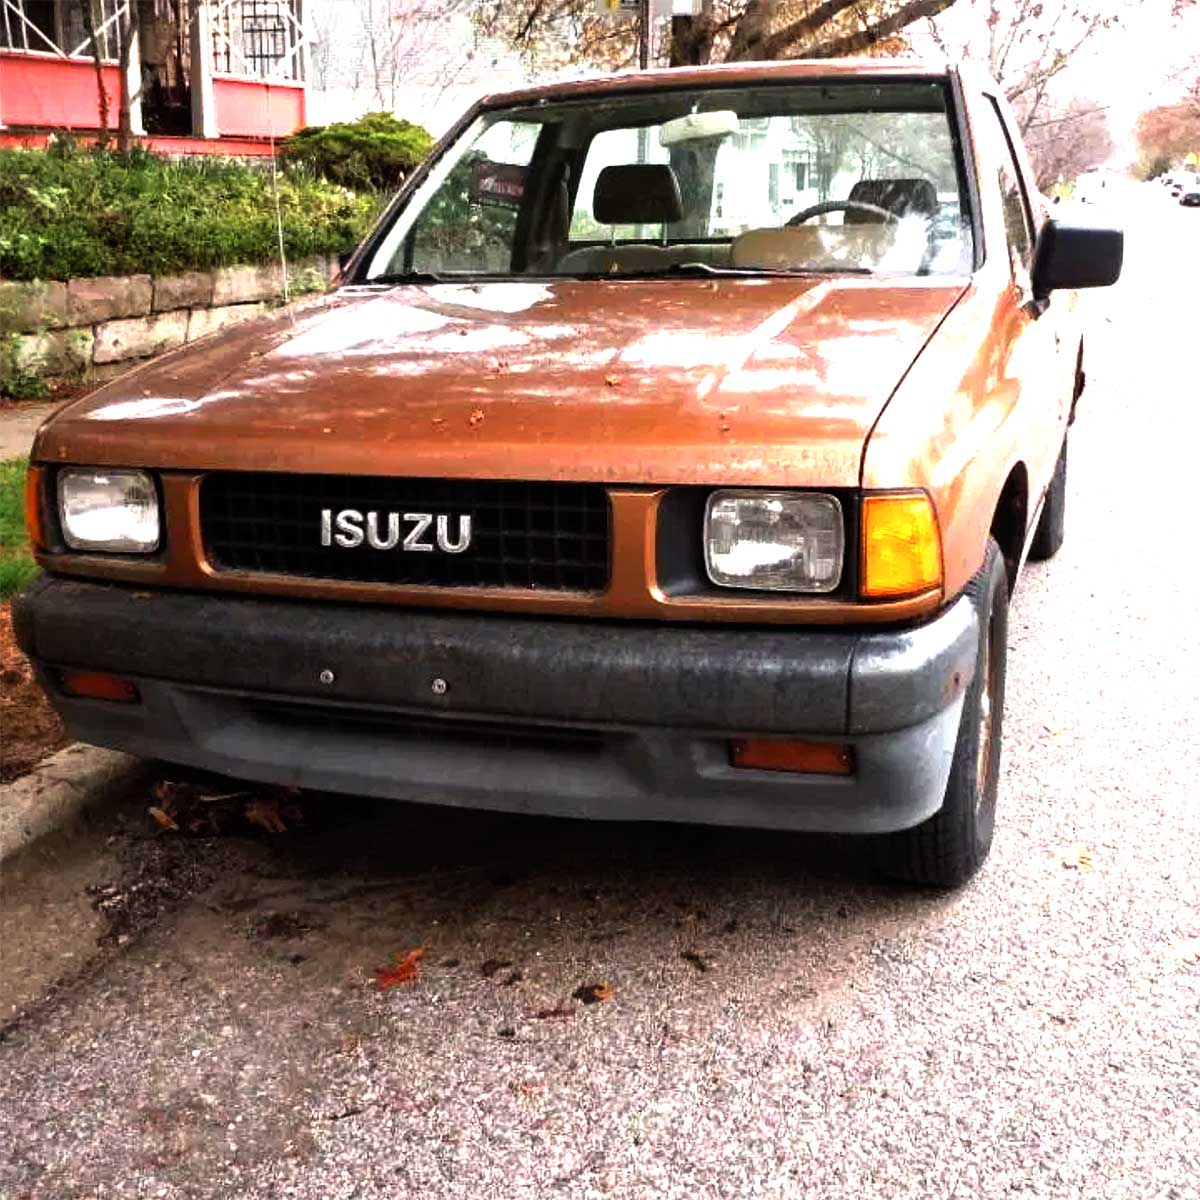 Curbside Classic: 1988 Isuzu Pickup - No Soup For You! - Curbside Classic